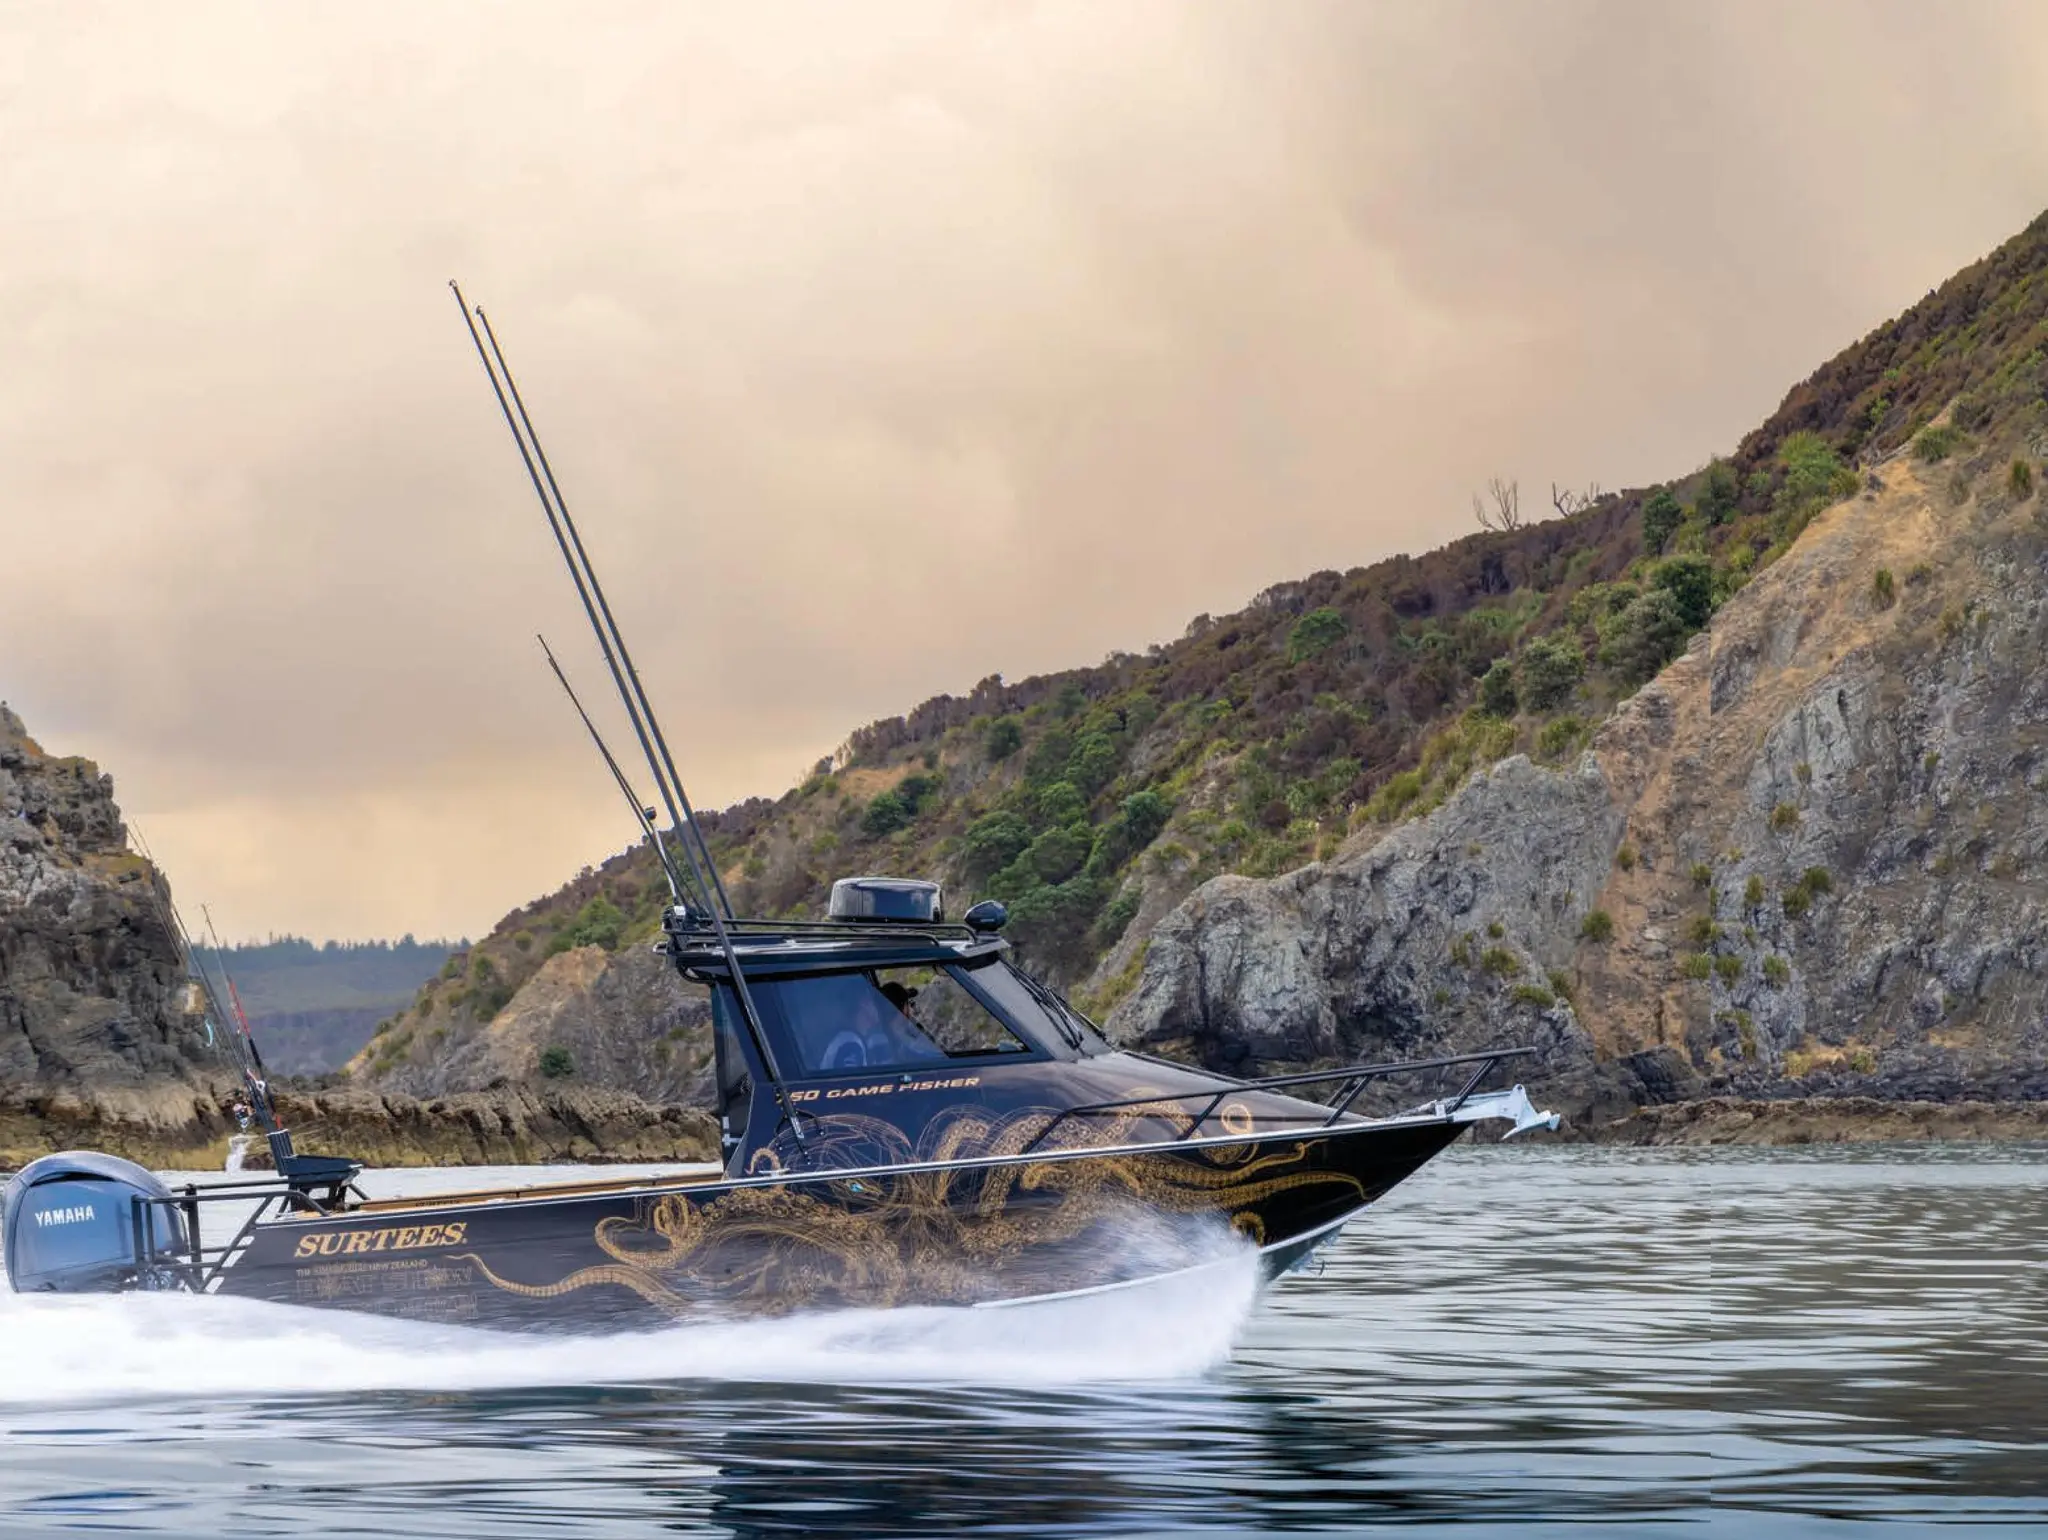 Boat Review: SURTEES YAMAHA BOAT SHOW GATE PRIZE